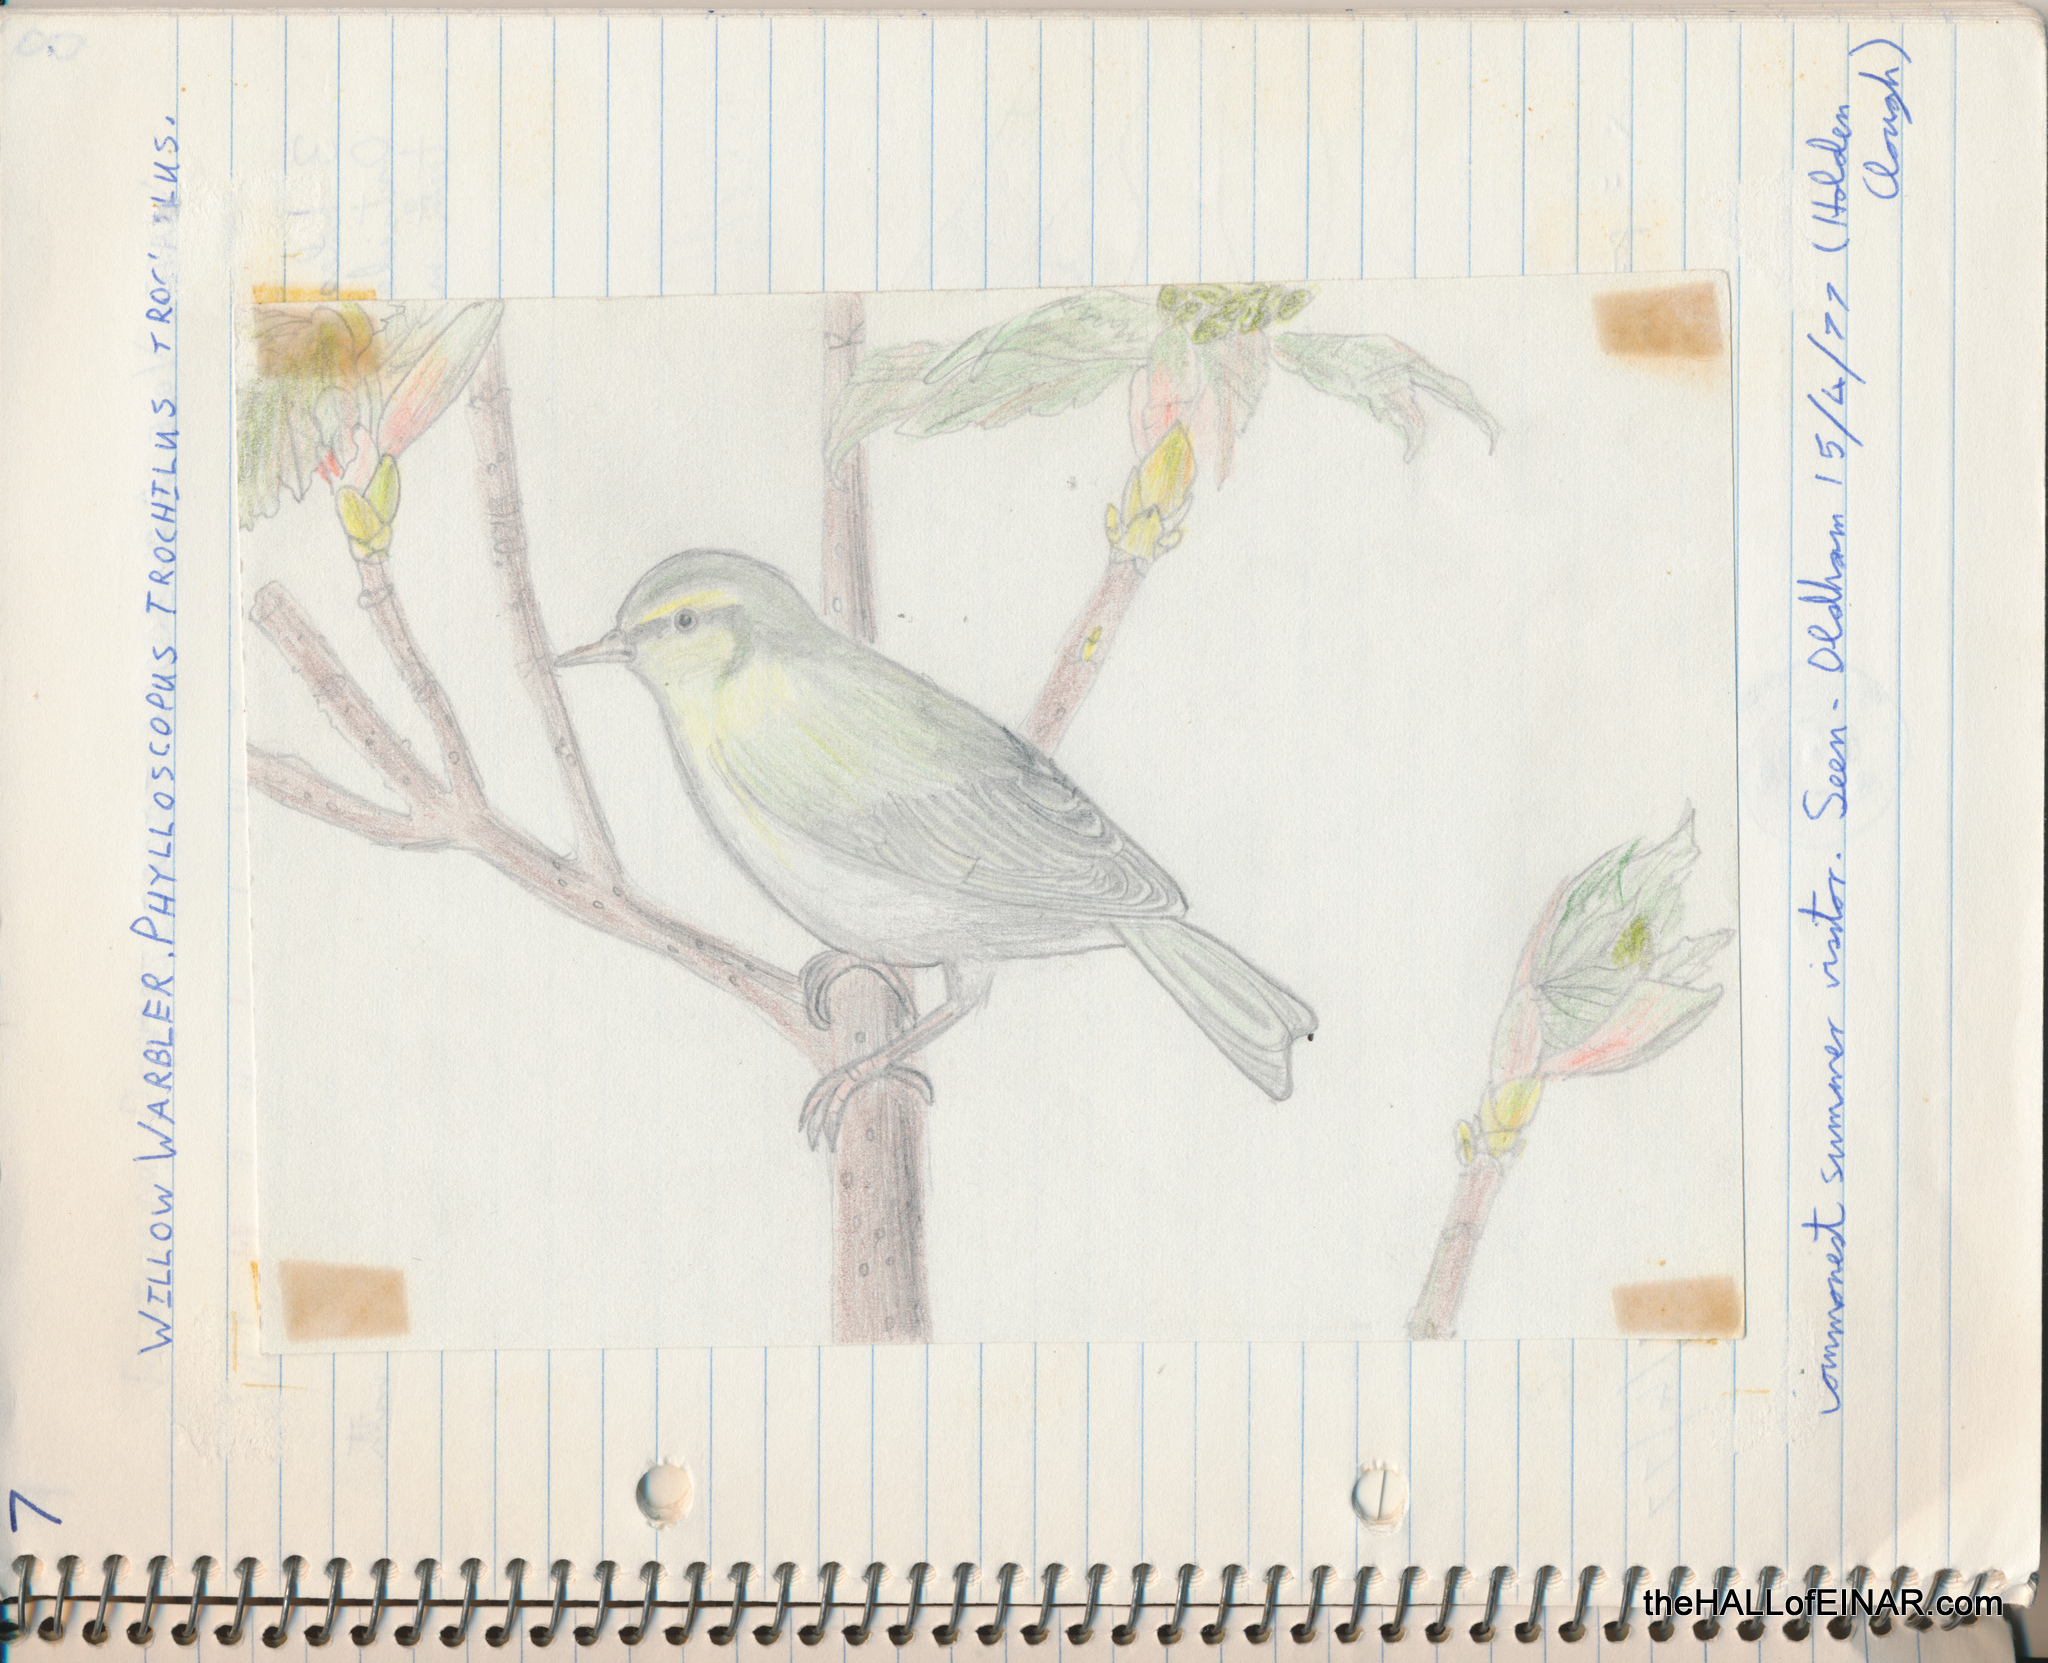 Willow Warbler - The Hall of Einar - (c) David Bailey (not the)